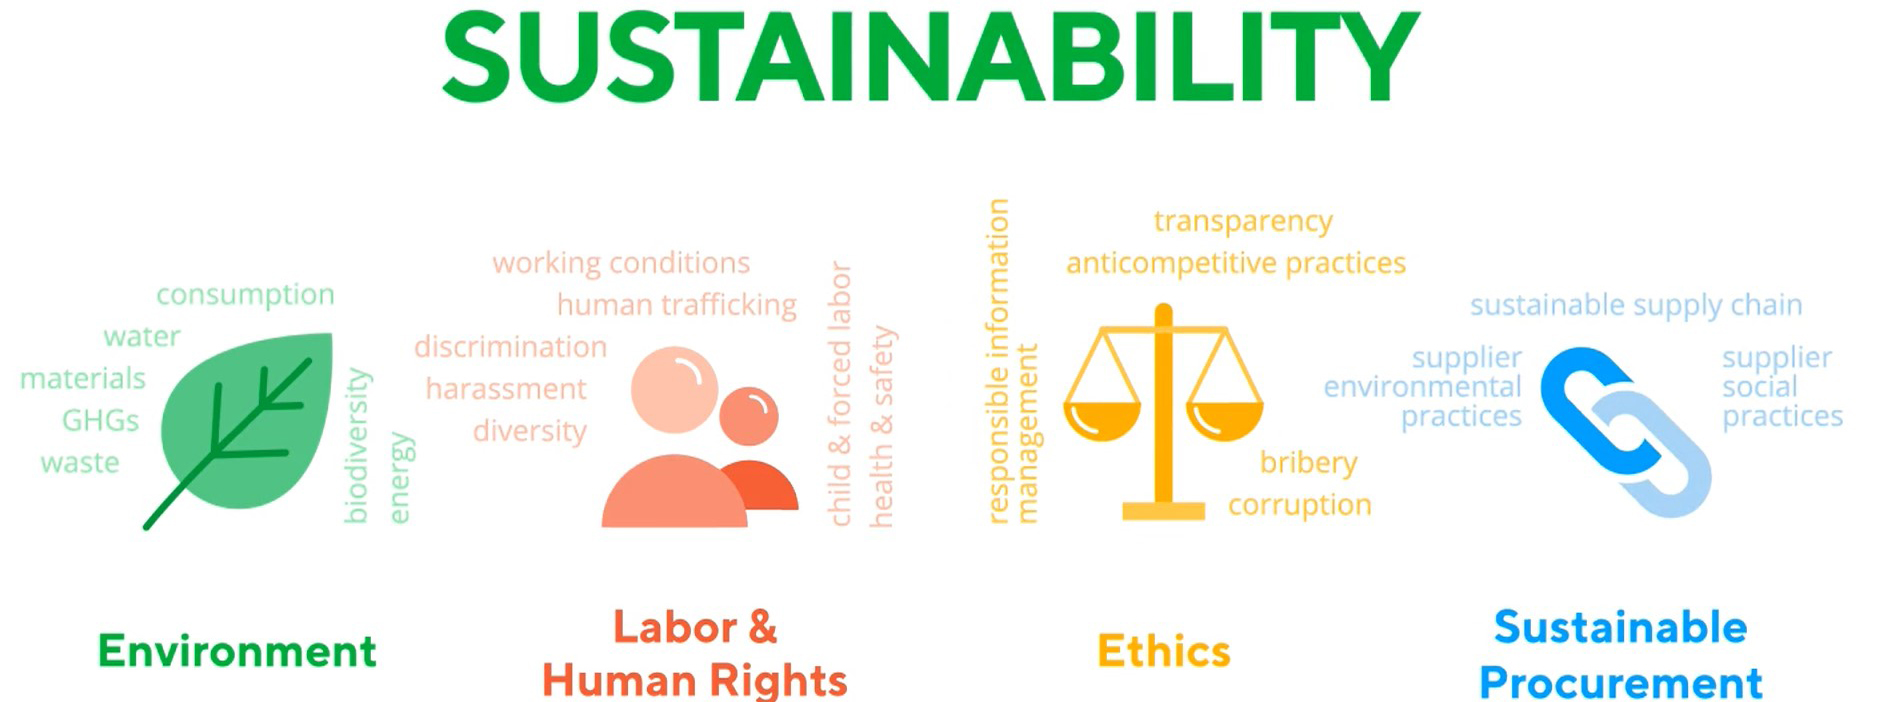 Environment, Labour & Human Rights, Ethics, Sustainable Producurement